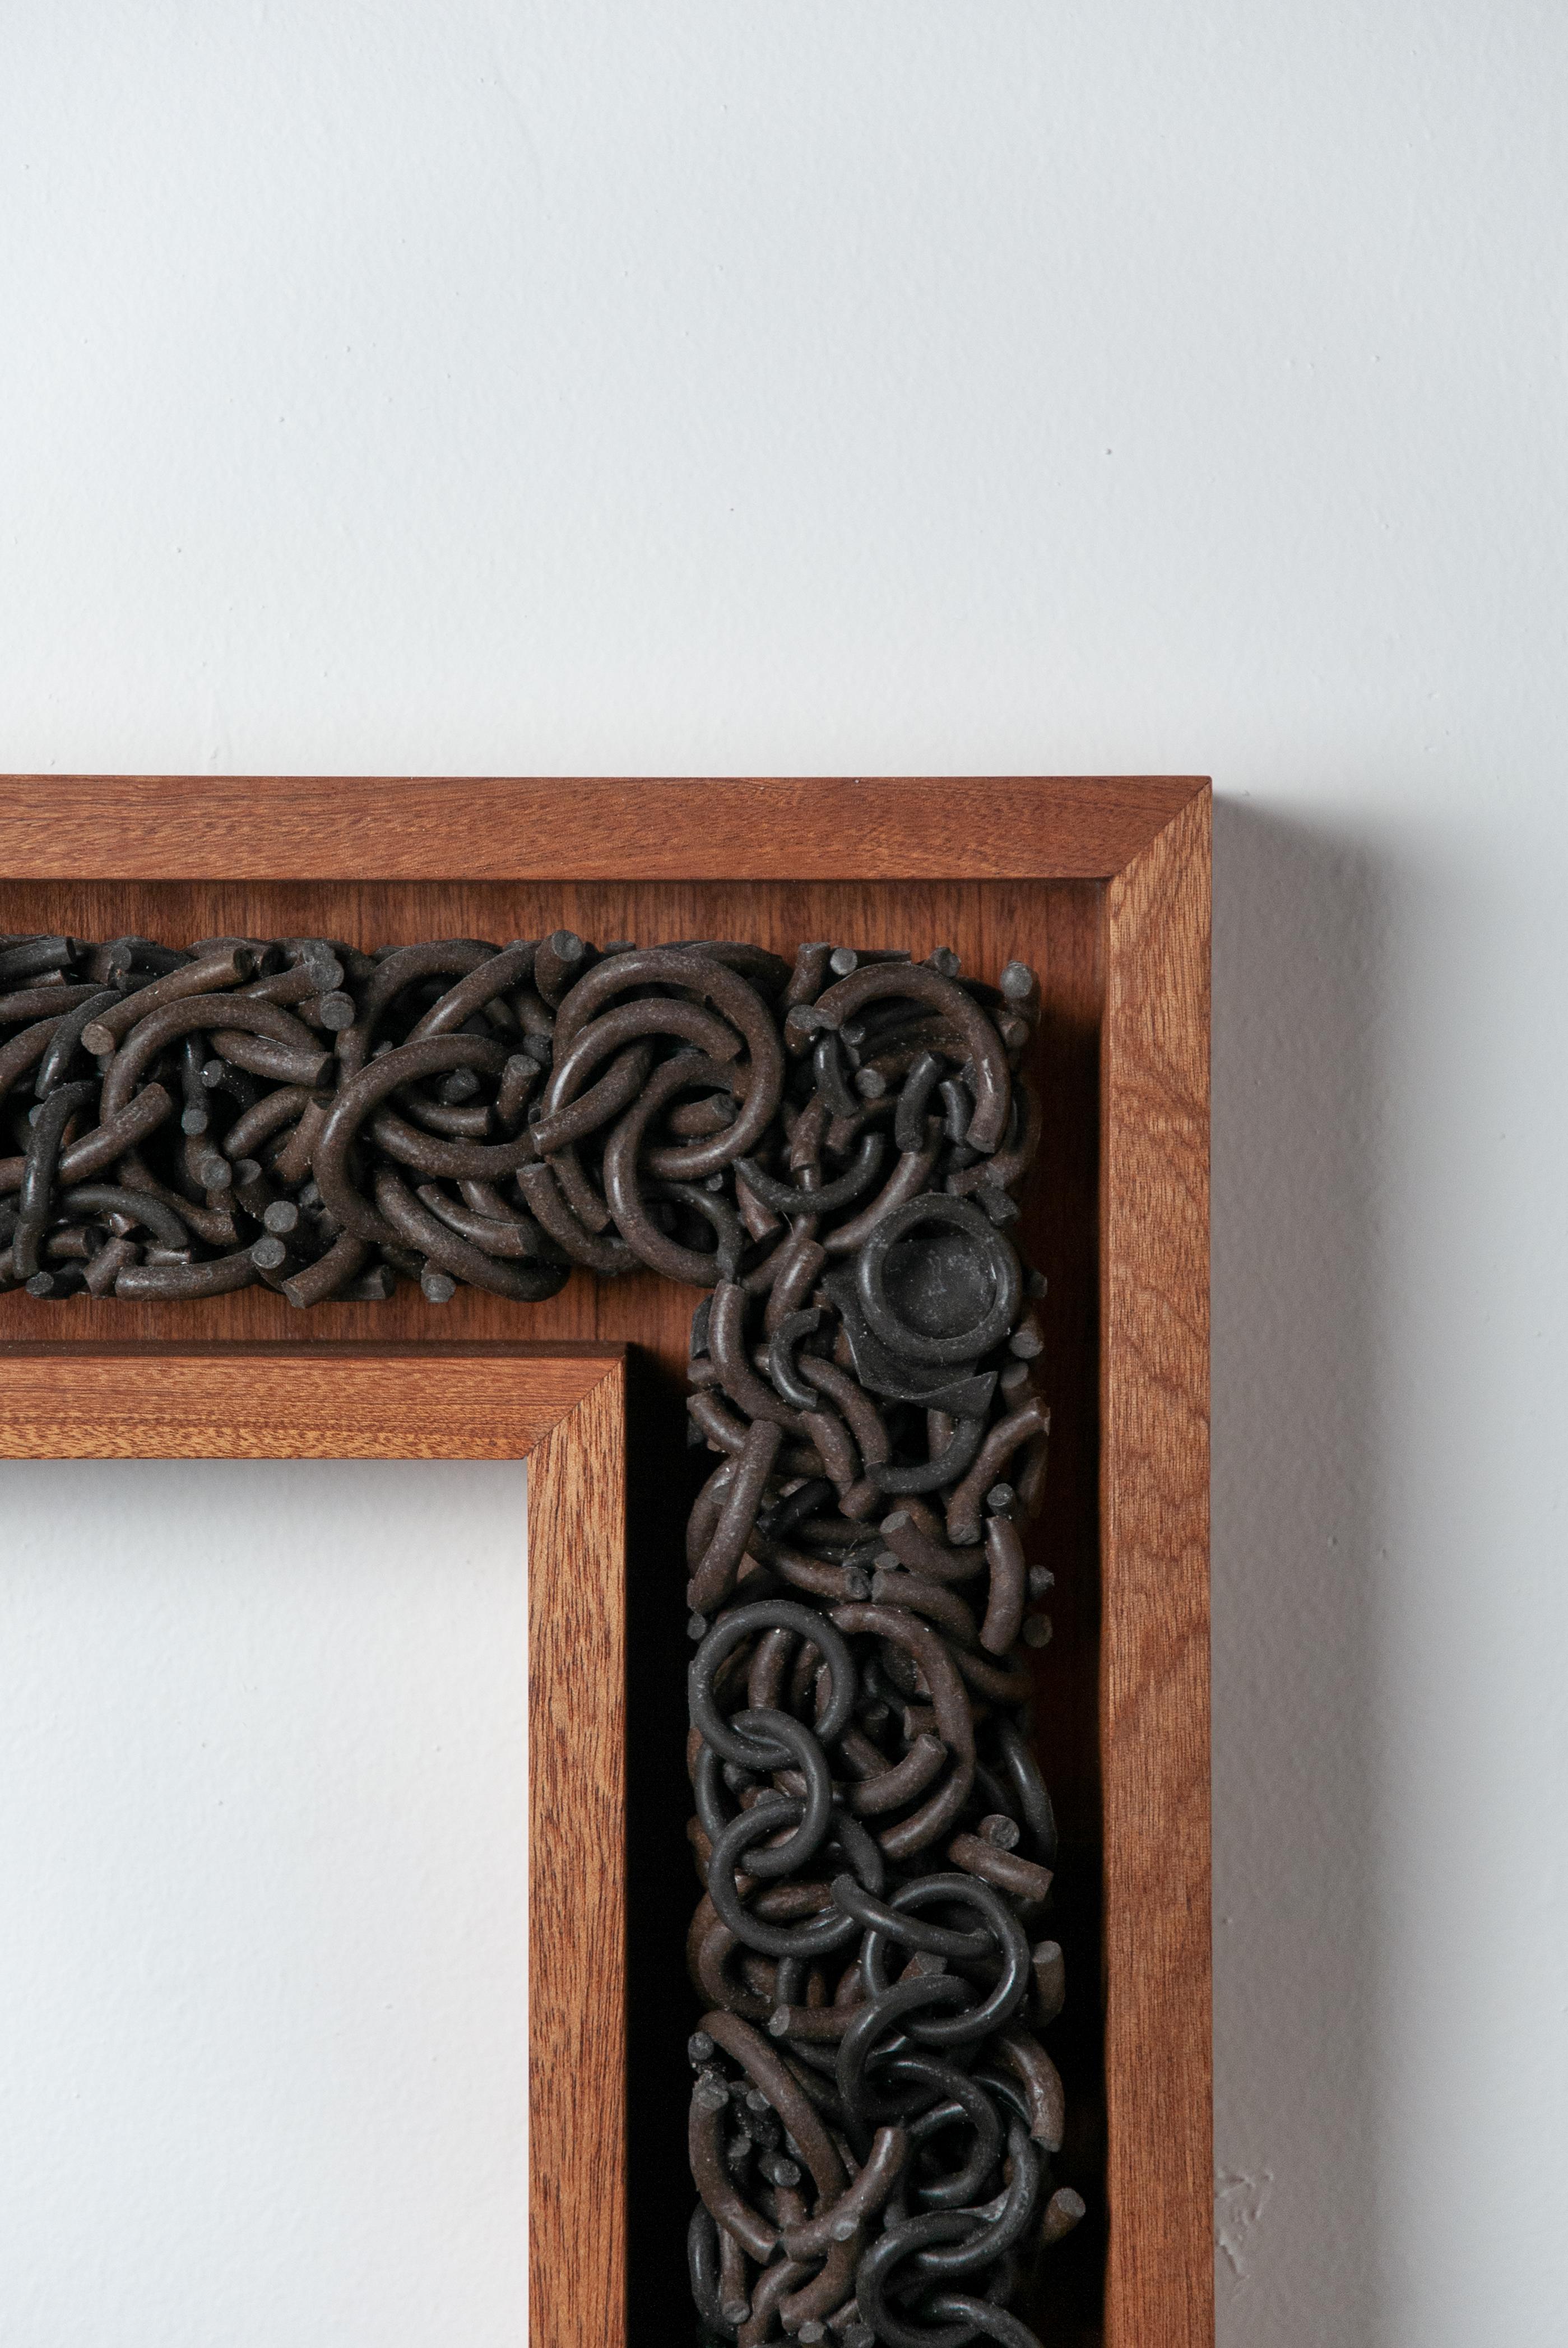 This wall sculpture balances the strength and delicacy of its materiality through the texture of the broken and whole ceramic links. These works are assembled from the collected ruins of previous work--they hold the history of the artists making